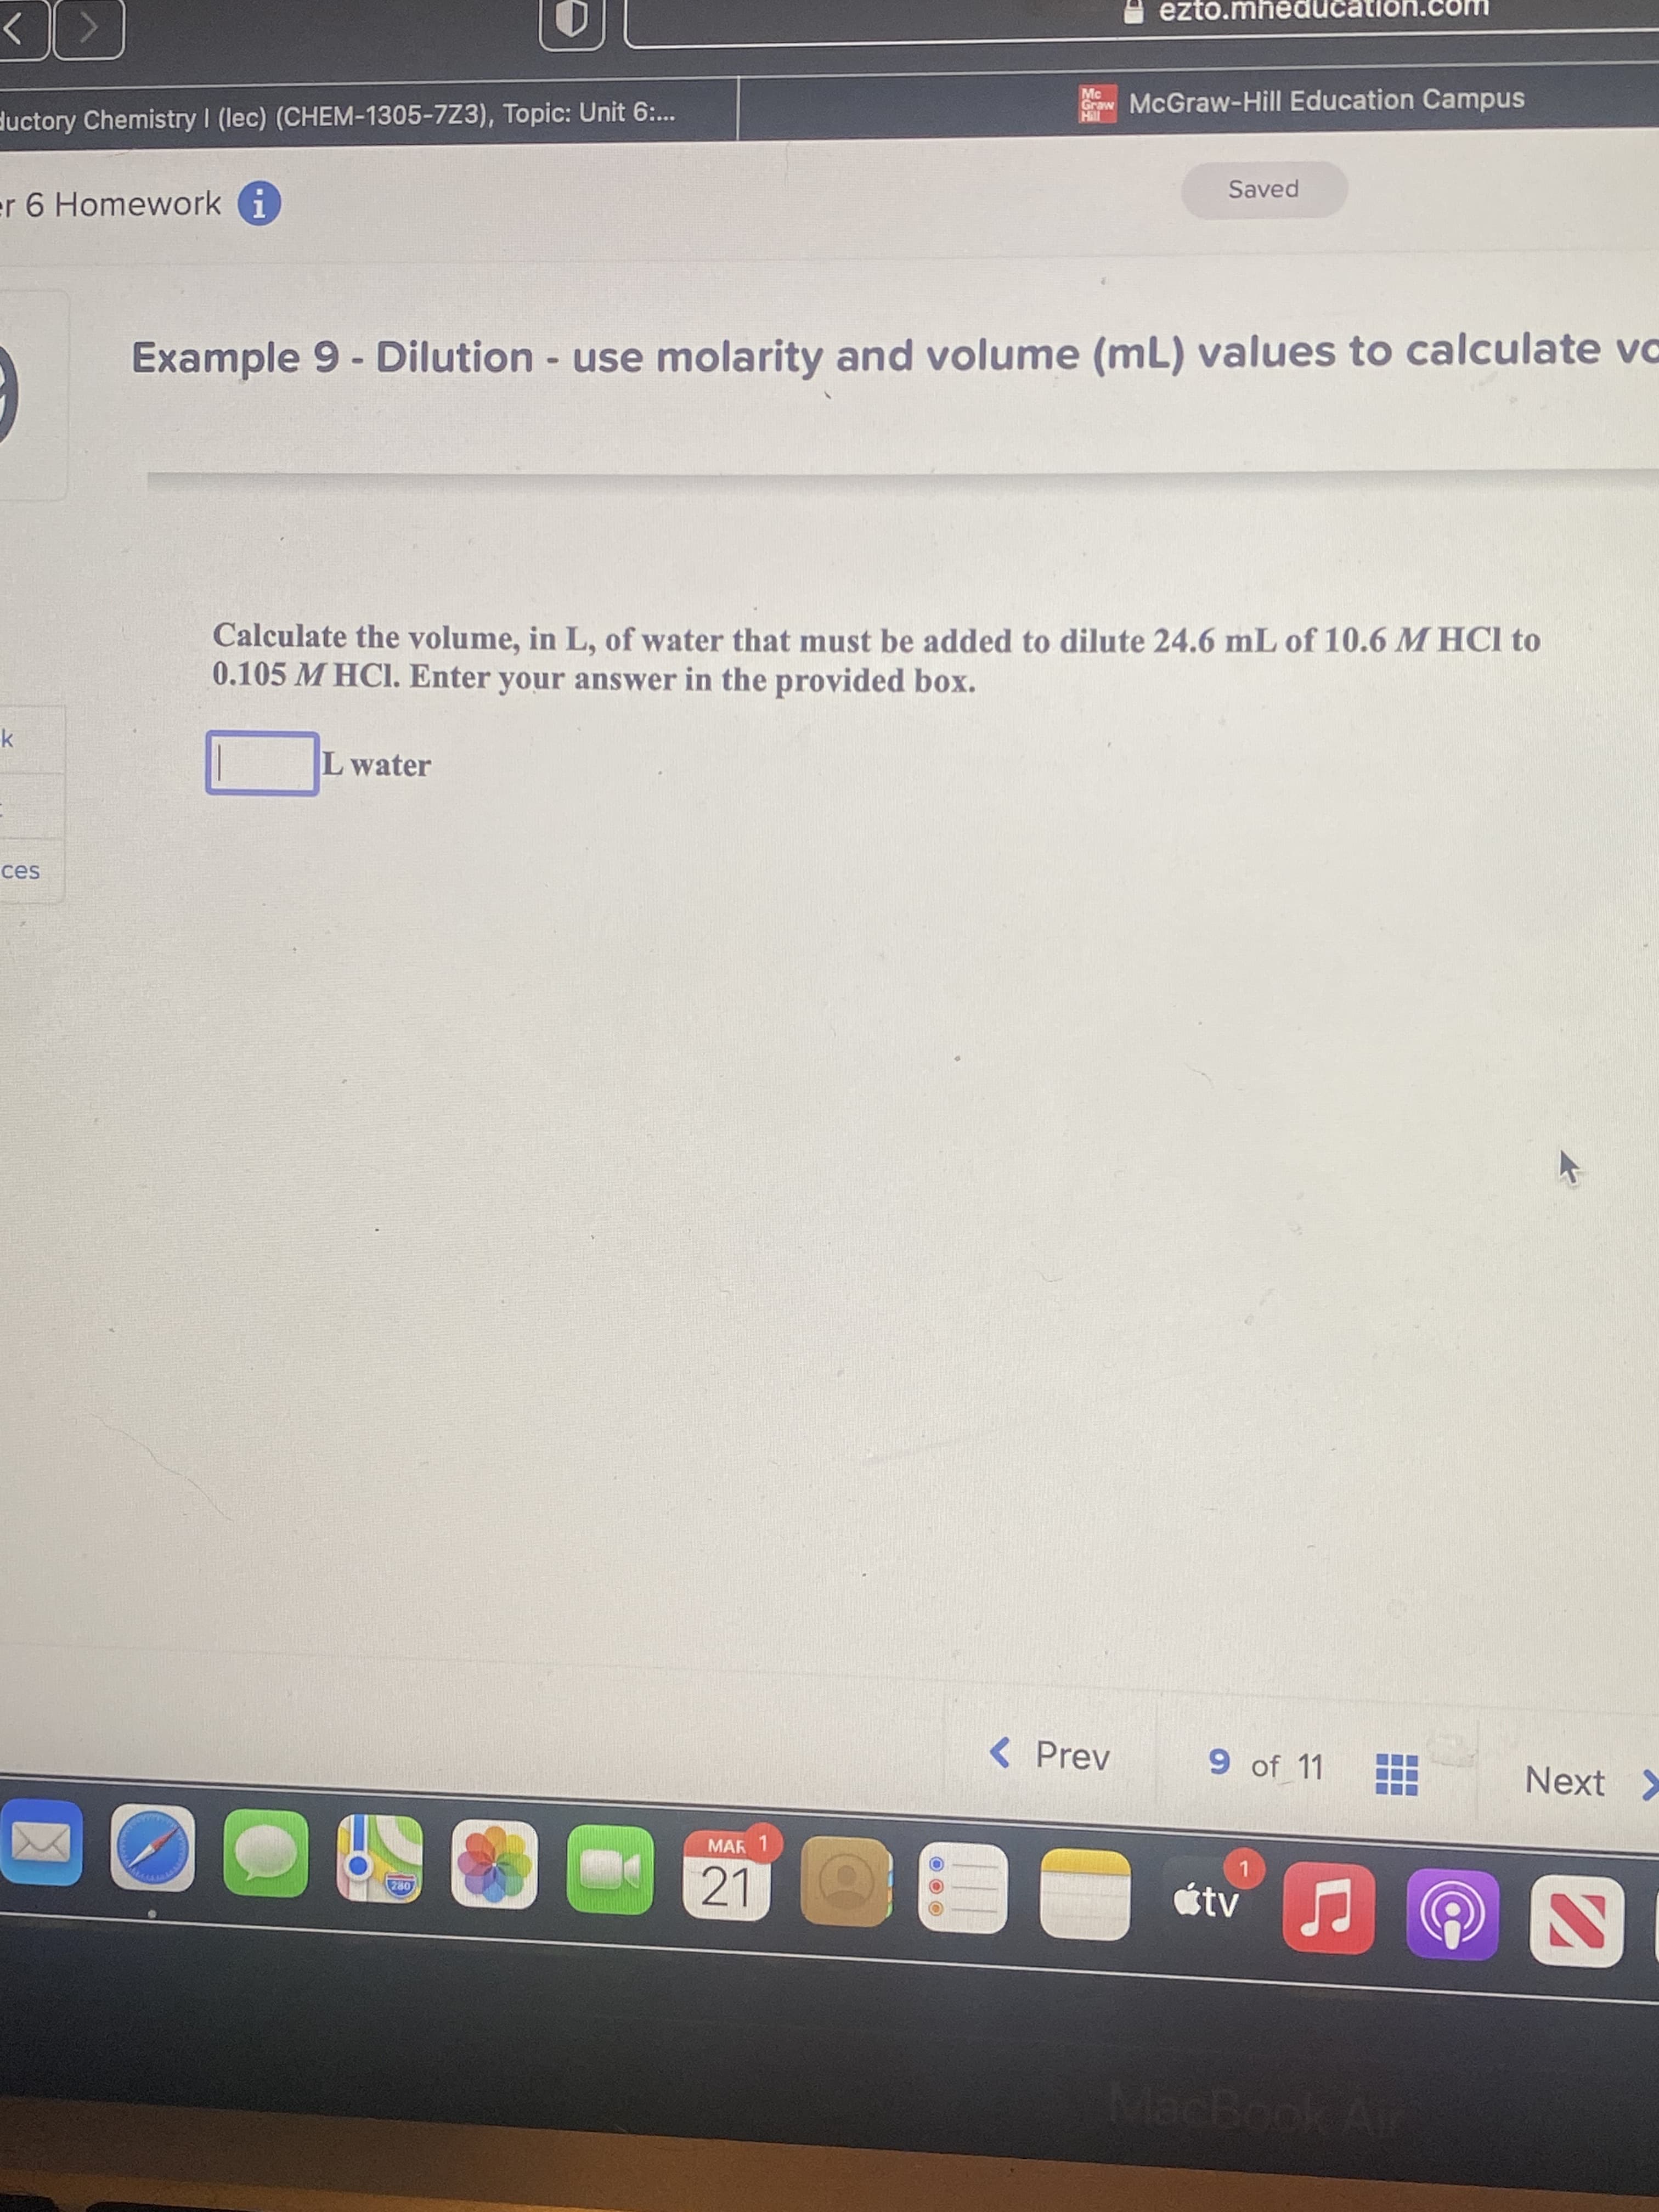 ezto.mheducation.
Mc
McGraw-Hill Education Campus
ductory Chemistry I (lec) (CHEM-1305-7Z3), Topic: Unit 6:..
Saved
er 6 Homework i
Example 9 - Dilution - use molarity and volume (mL) values to calculate vo
Calculate the volume, in L, of water that must be added to dilute 24.6 mL of 10.6 M HCl to
0.105 M HCI. Enter your answer in the provided box.
L water
ces
<Prev
9 of 11
Next >
MAR 1
21
étv
MacBook Air
